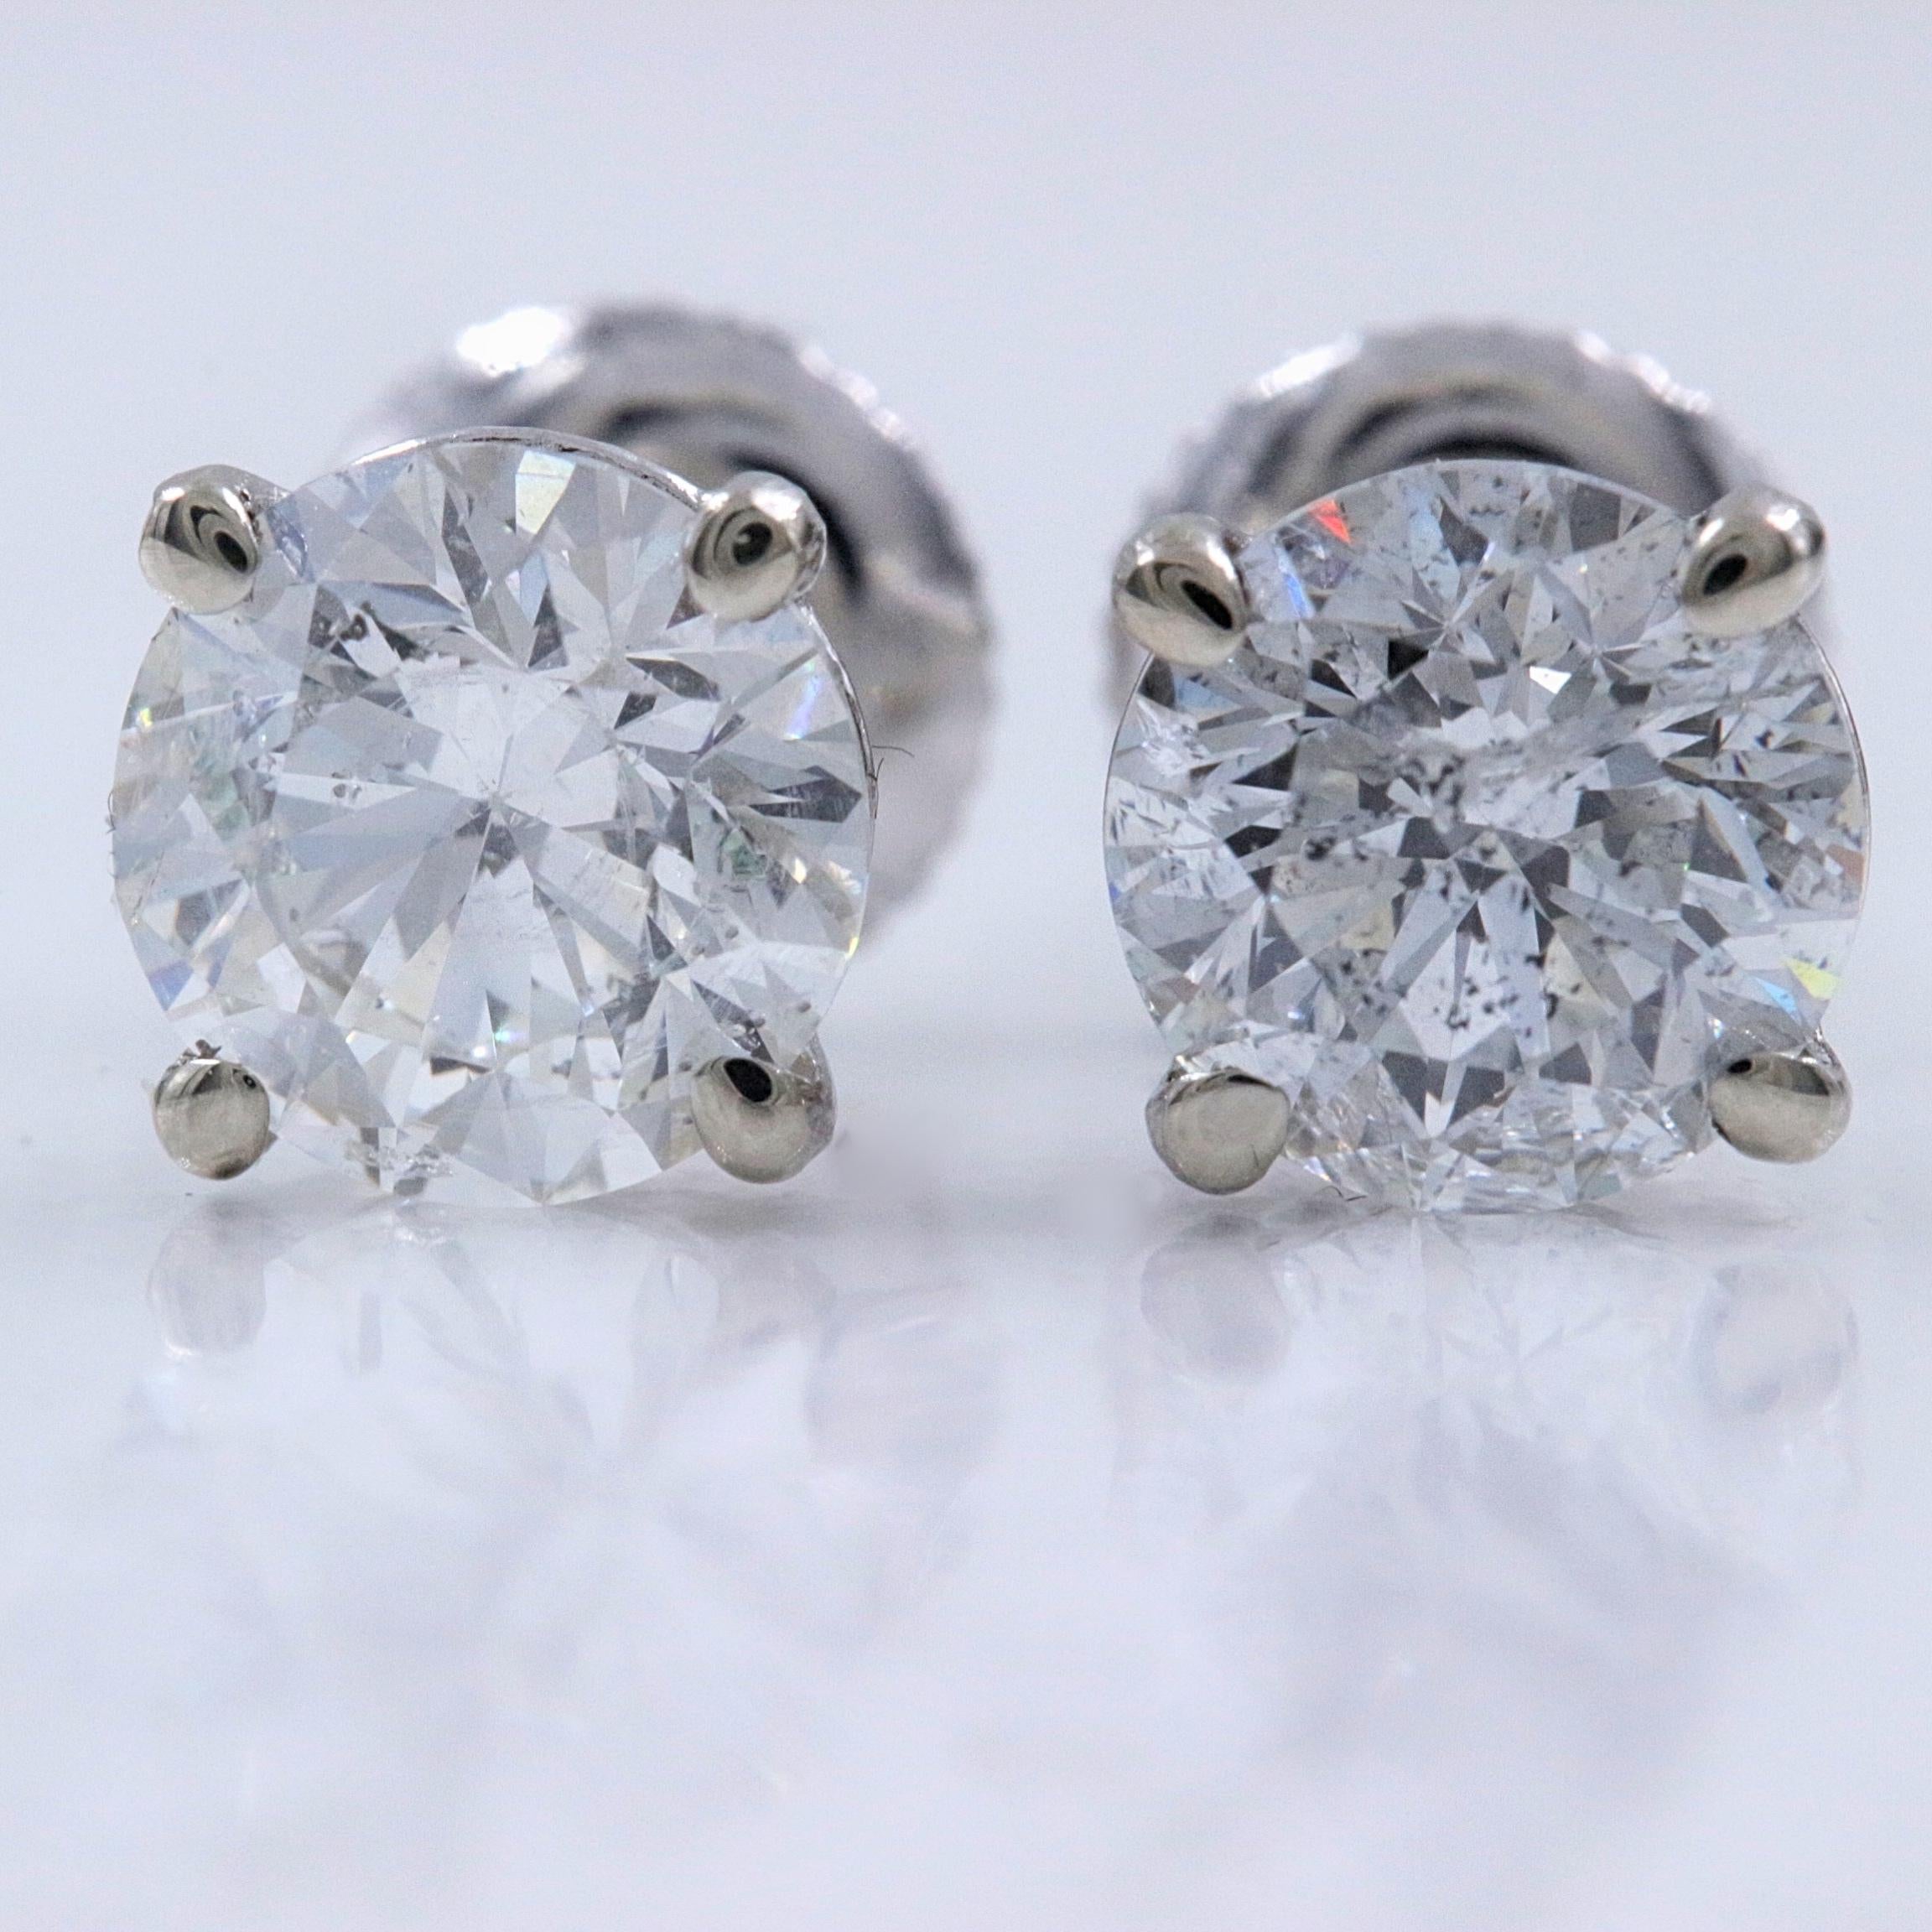 Round Diamond Solitaire Stud Earrings

Style:  Solitaire in 4-Prong Martini Setting with Screw Backs
Metal:  14k White Gold
Total Carat Weight:  2.00 tcw
Diamond #1:  Round 1.00 cts J I1
Diamond #2:  Round 1.00 cts J I1
Hallmark:  585

Retail Value: